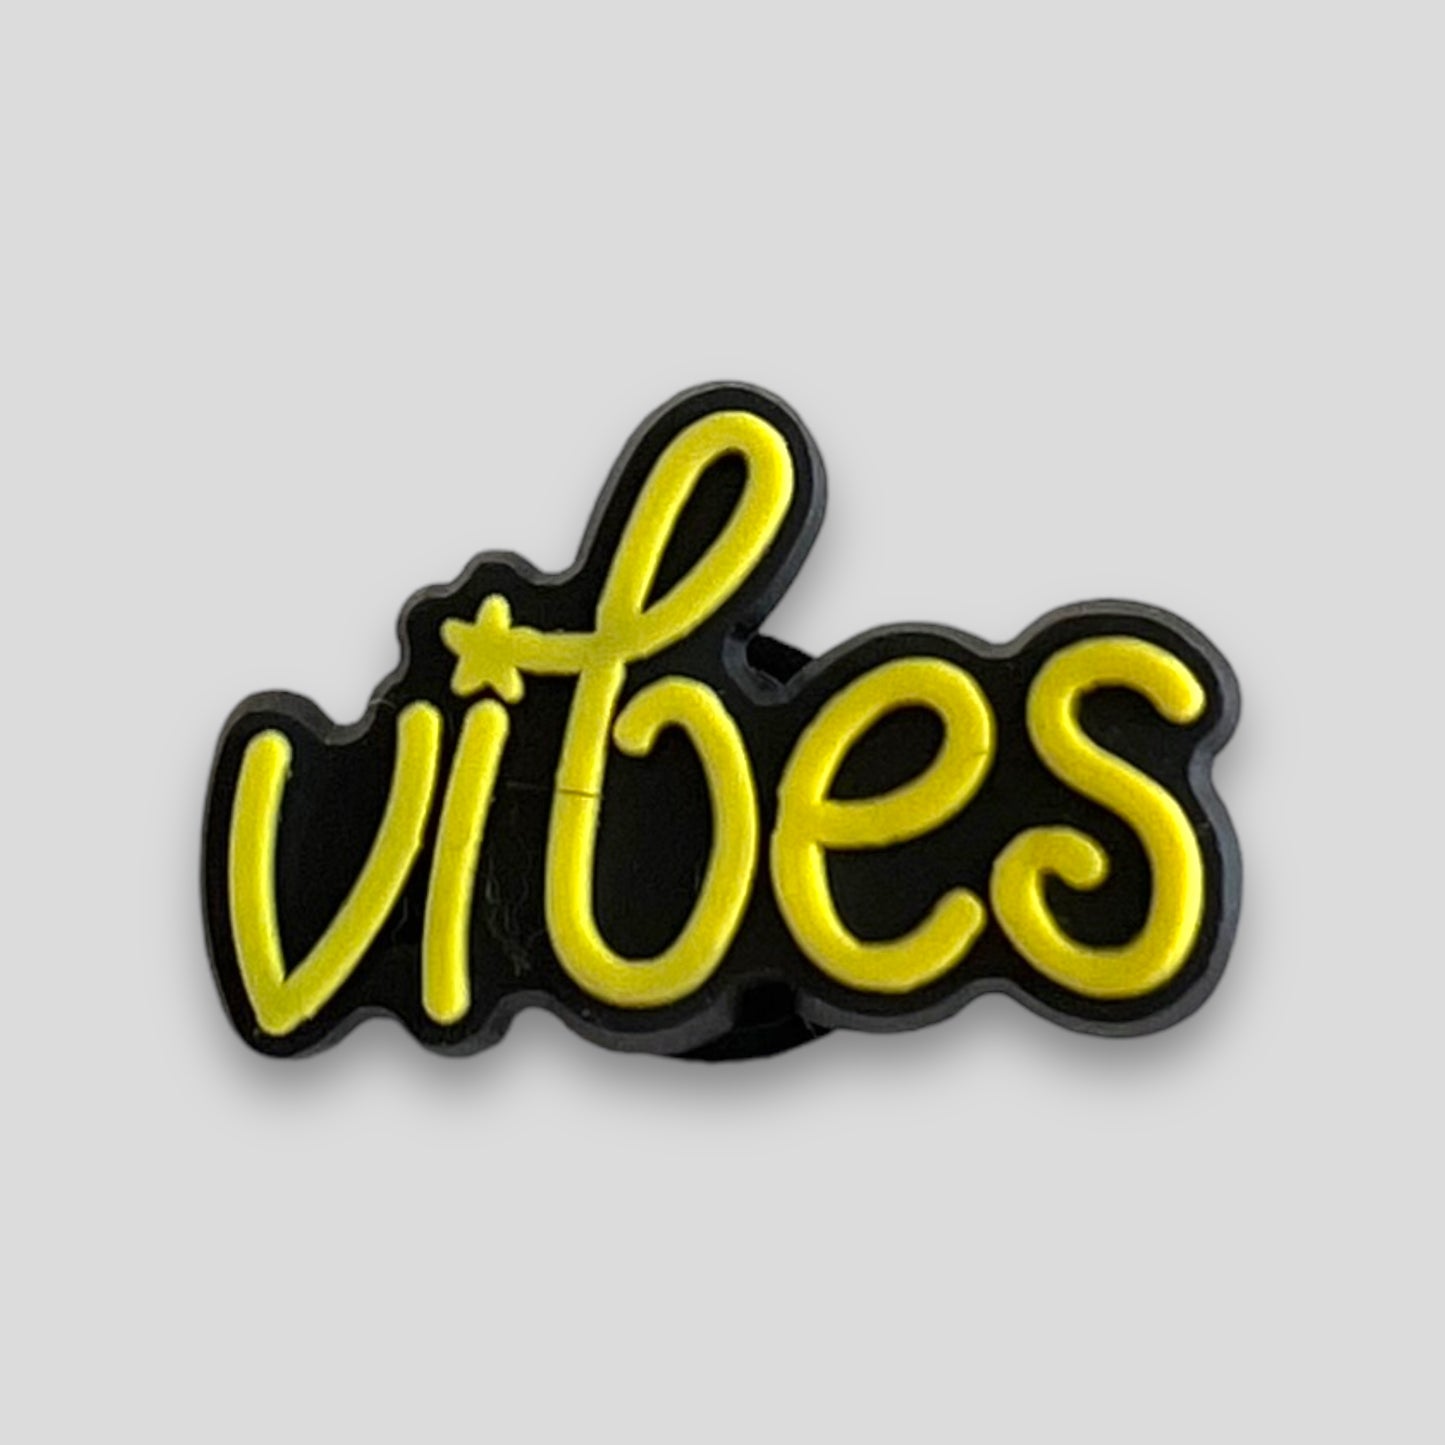 Vibes | Quotes